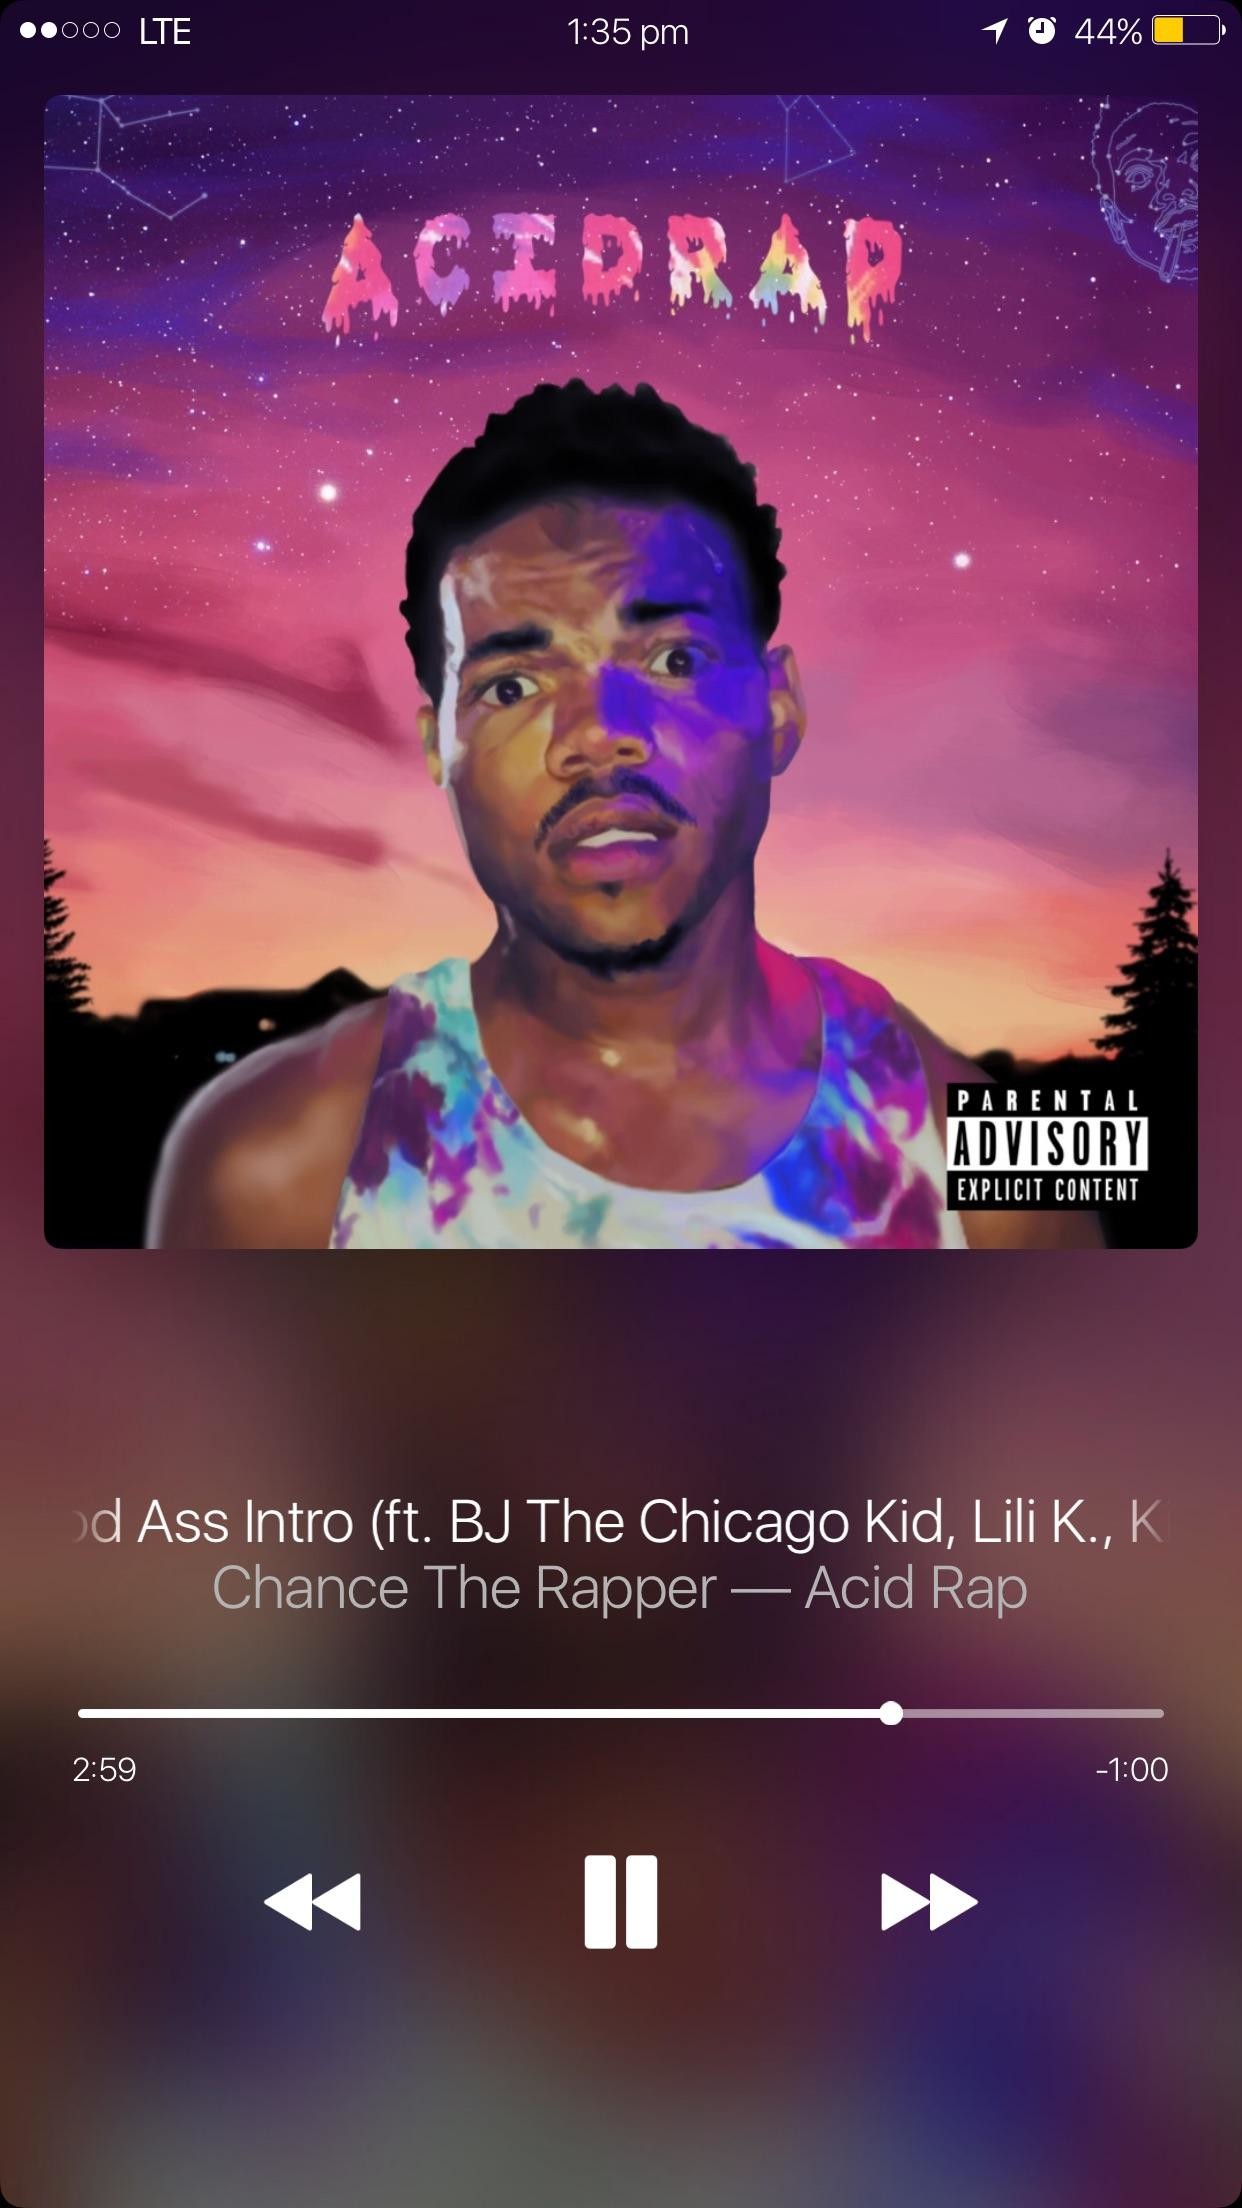 Request[Request] Blurred album art as the lockscreen wallpaper when playing  music …